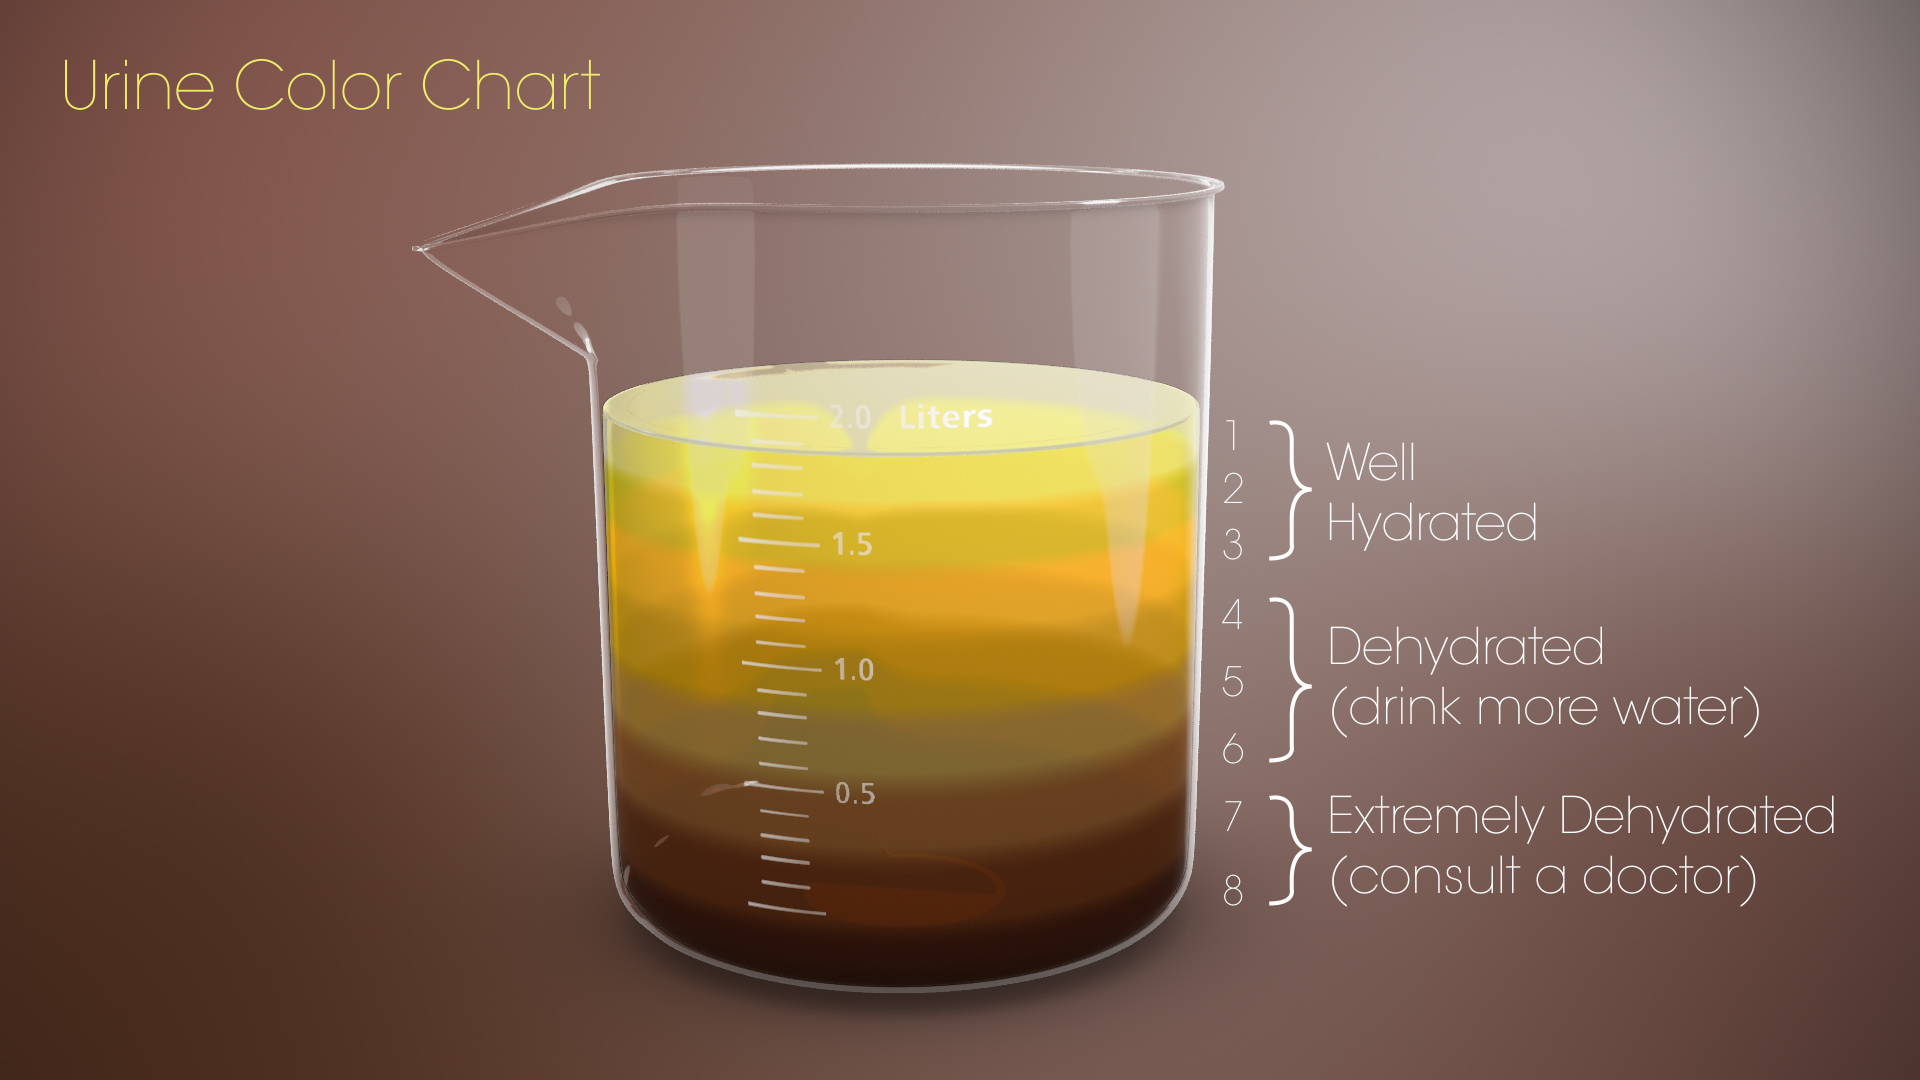 What exactly is analysed in a urine analysis?